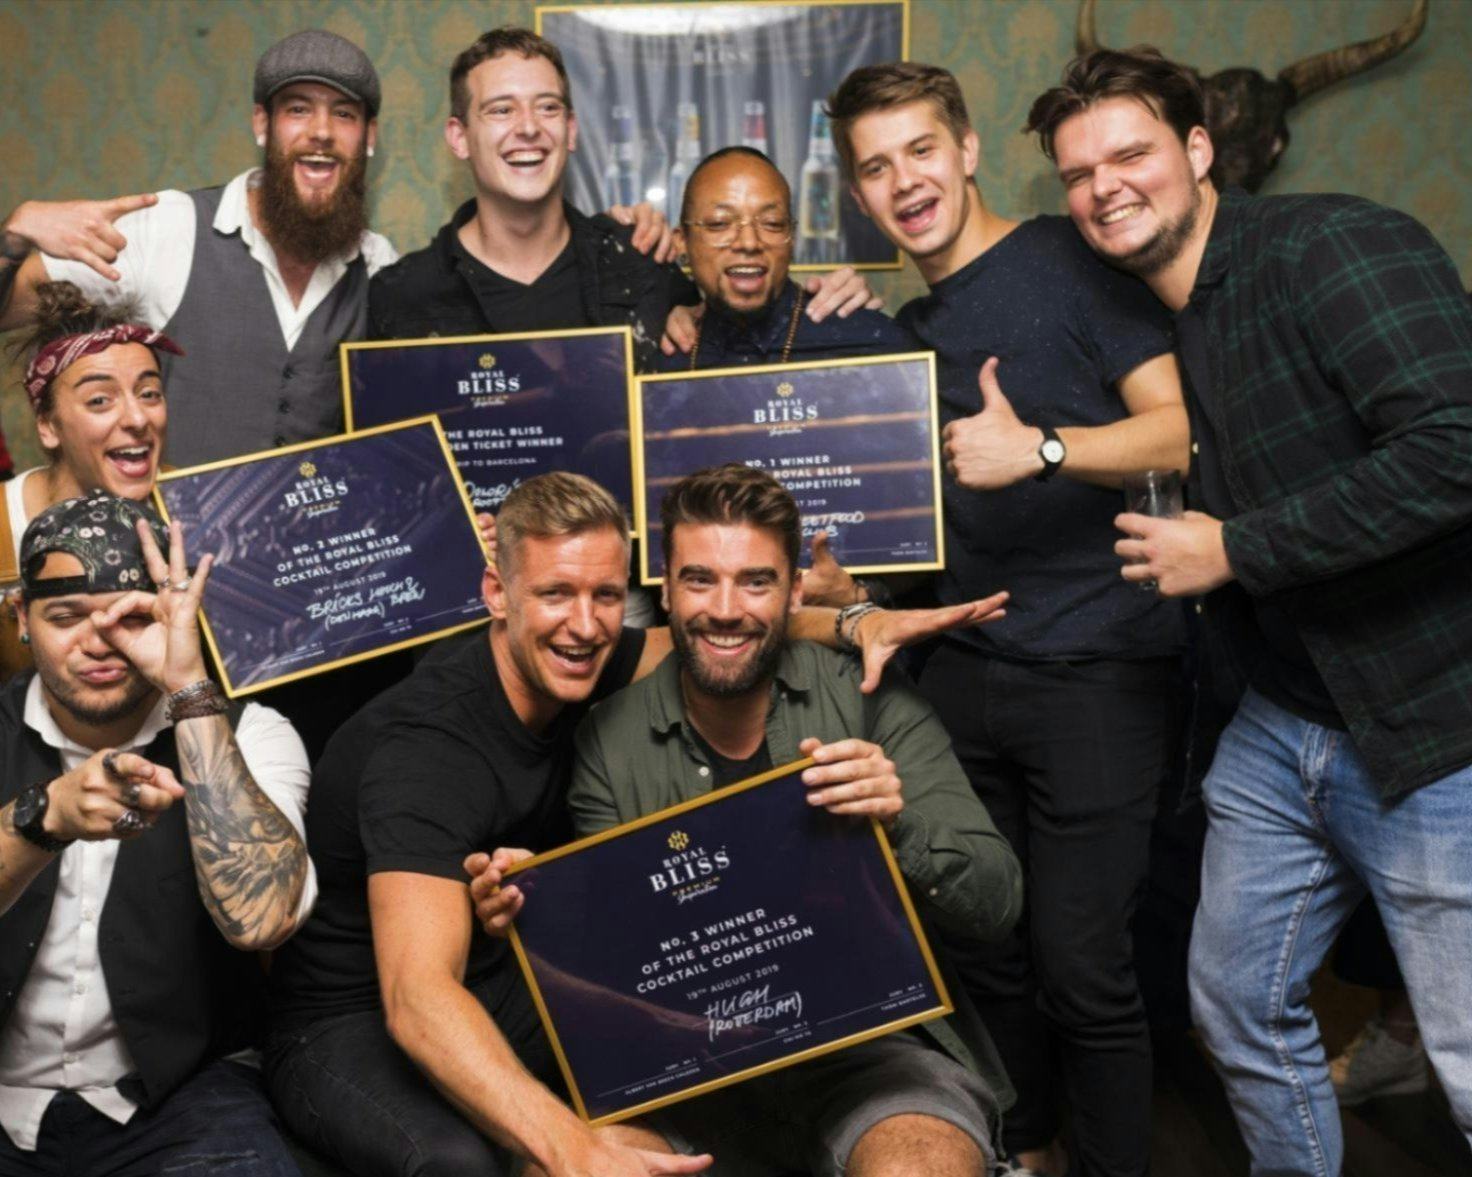 The Streetfood Club wint Royal Bliss Cocktail Competition